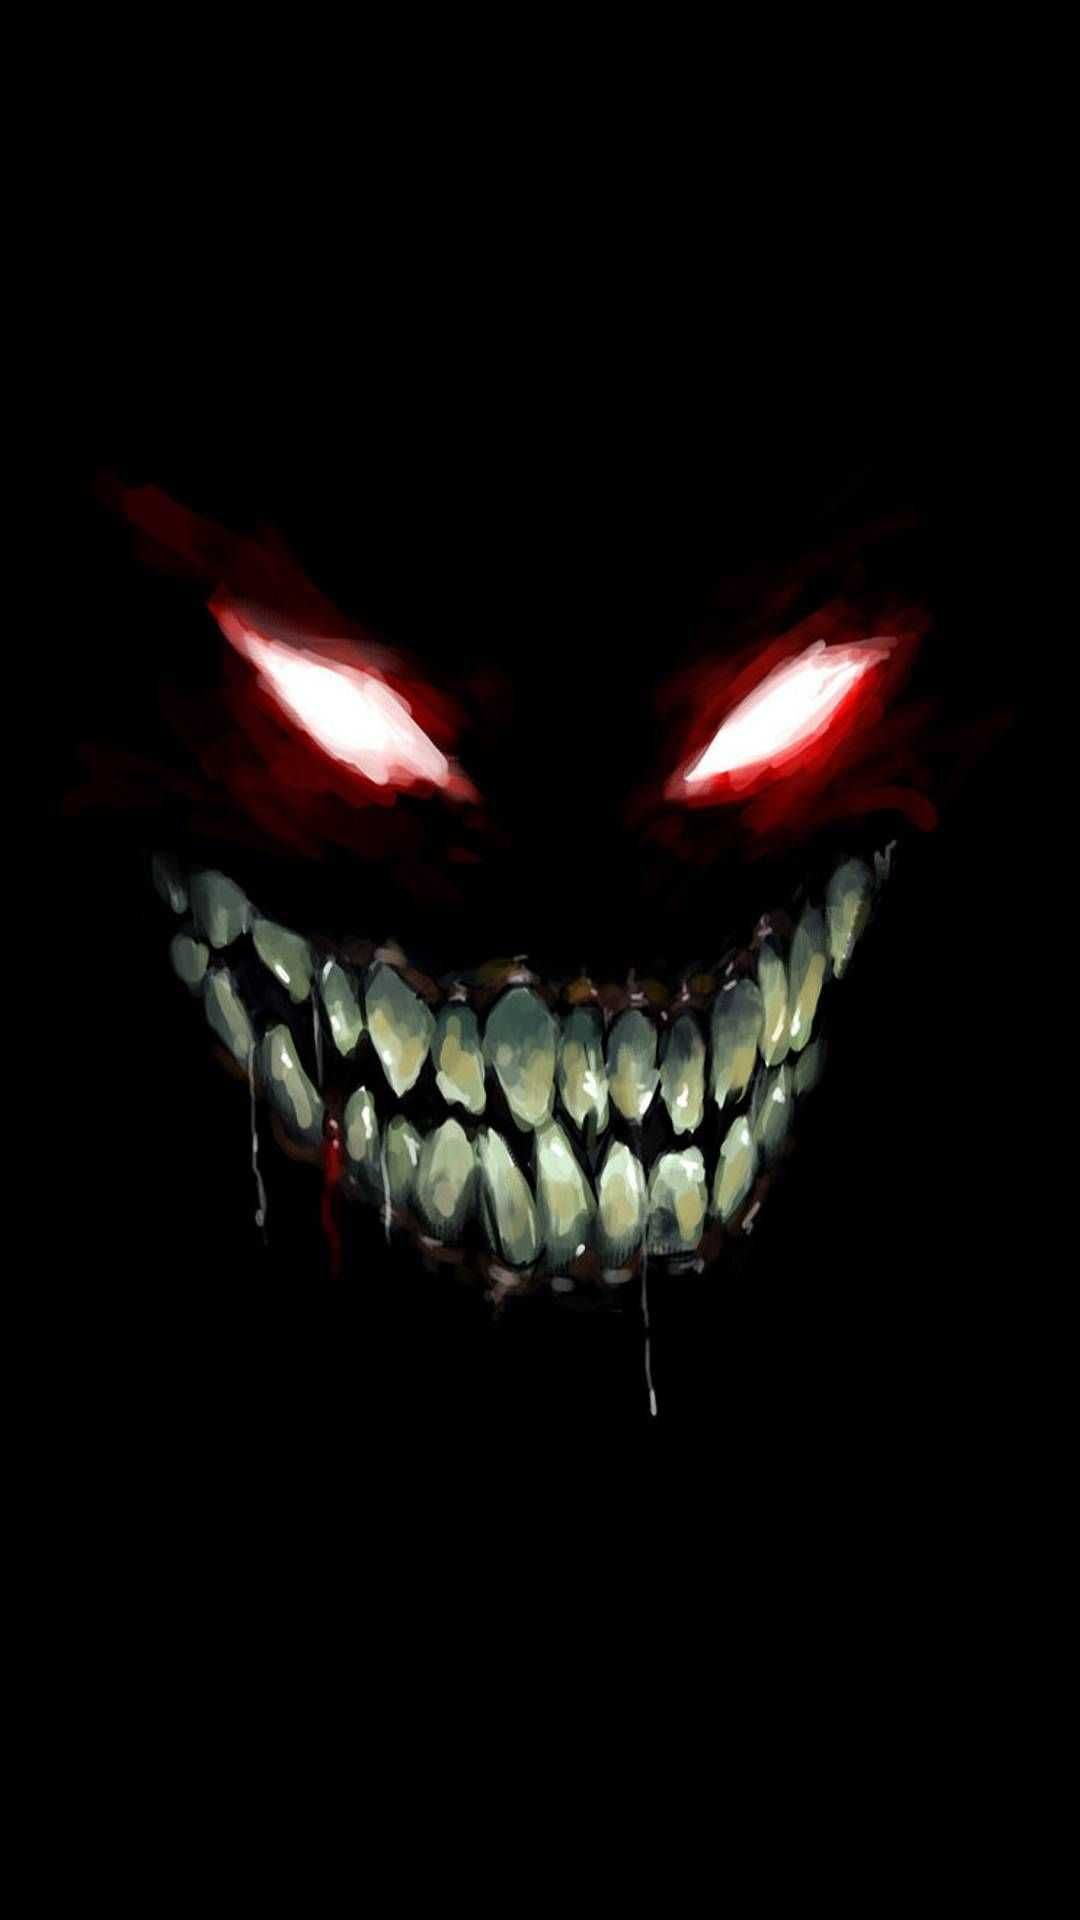 1080x1920 Scary Wallpaper Share Scary Wallpaper with your loved ones. Discover Creepy, Fear, Horror, Scary, Spooky and more. htt&acirc;&#128;&brvbar; | Dios del amor, Fondos de minecraft, Dioses